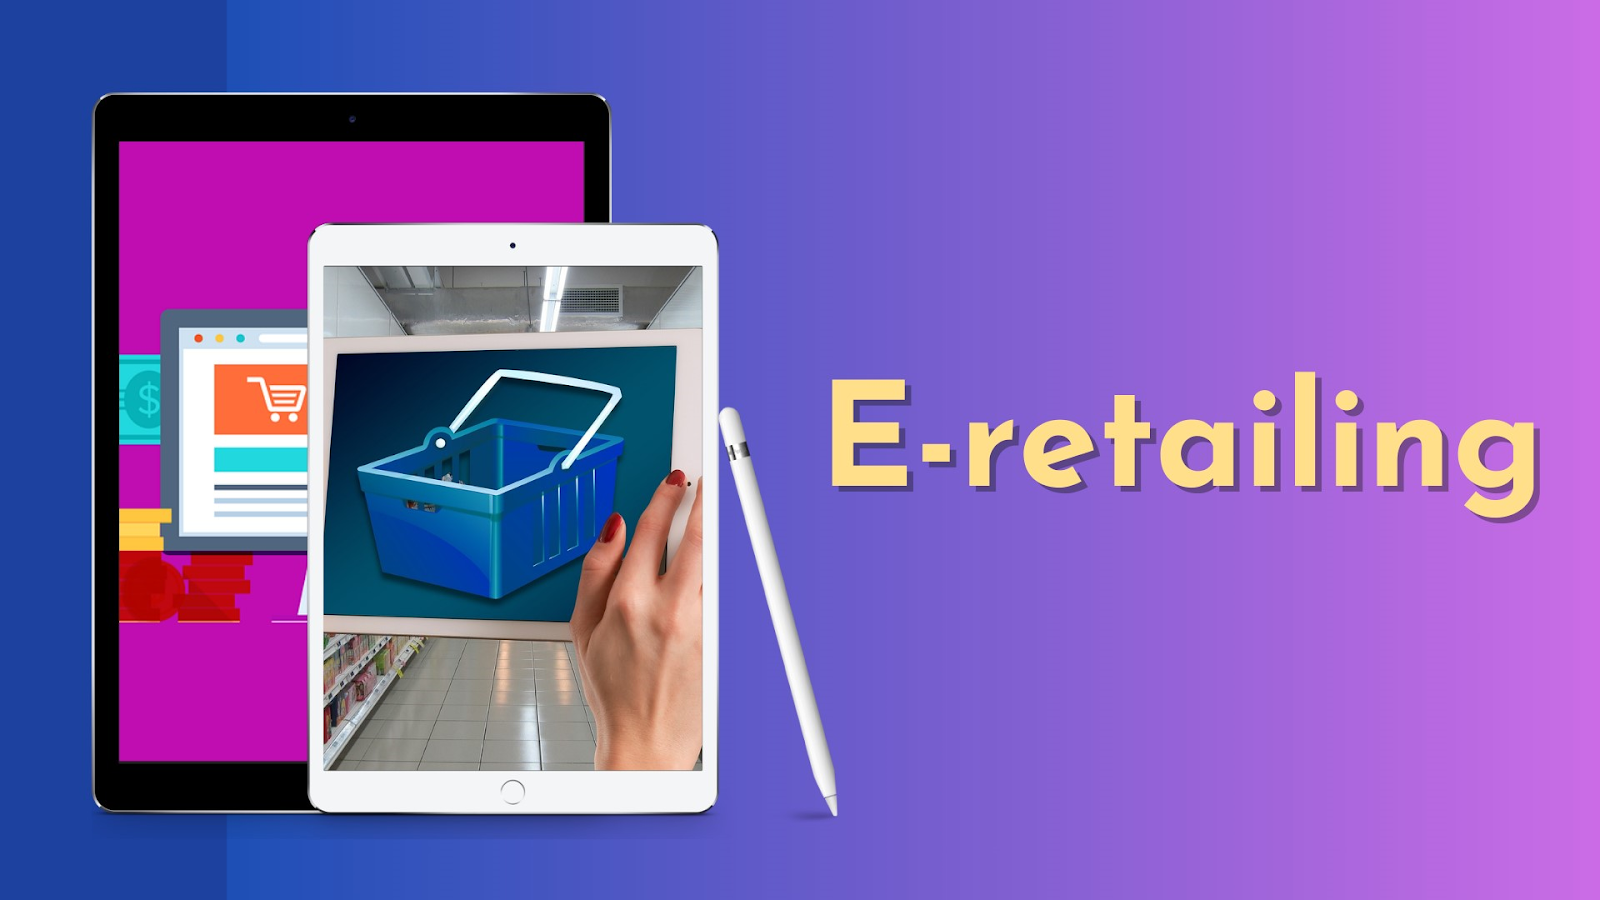 What is e-retailing